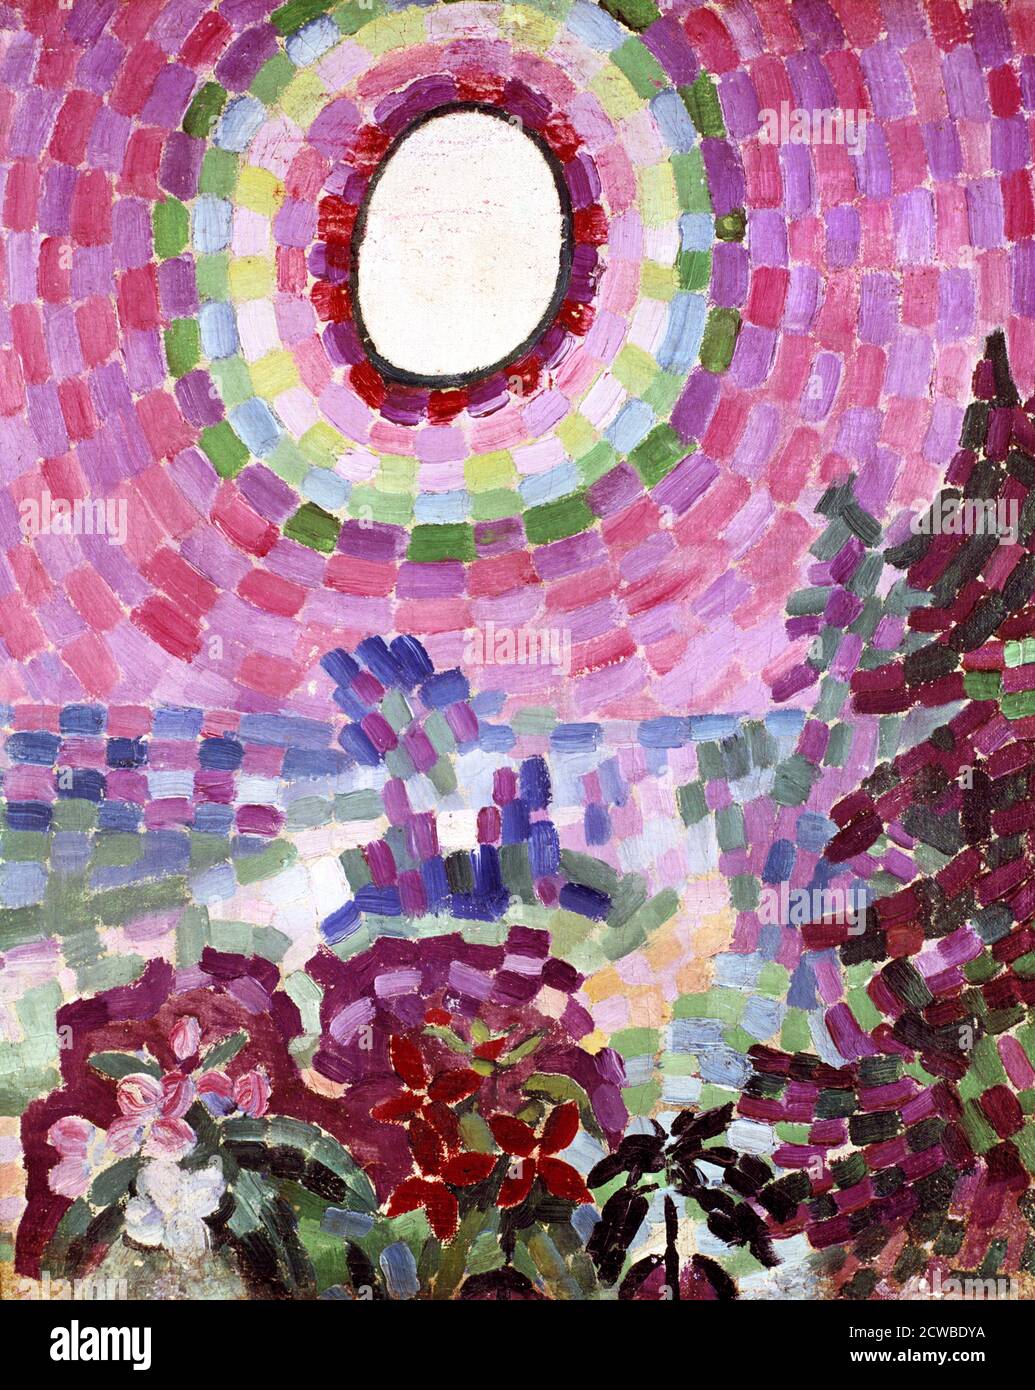 Passage with Disc',1906 Artist: Robert Delaunay. Robert Delaunay (April 12, 1885 to October 25, 1941) was a French artist. He was born in Paris, France, and died in Montpellier, France. Delaunay concentrated on impressionism, while his later works were more abstract. Stock Photo